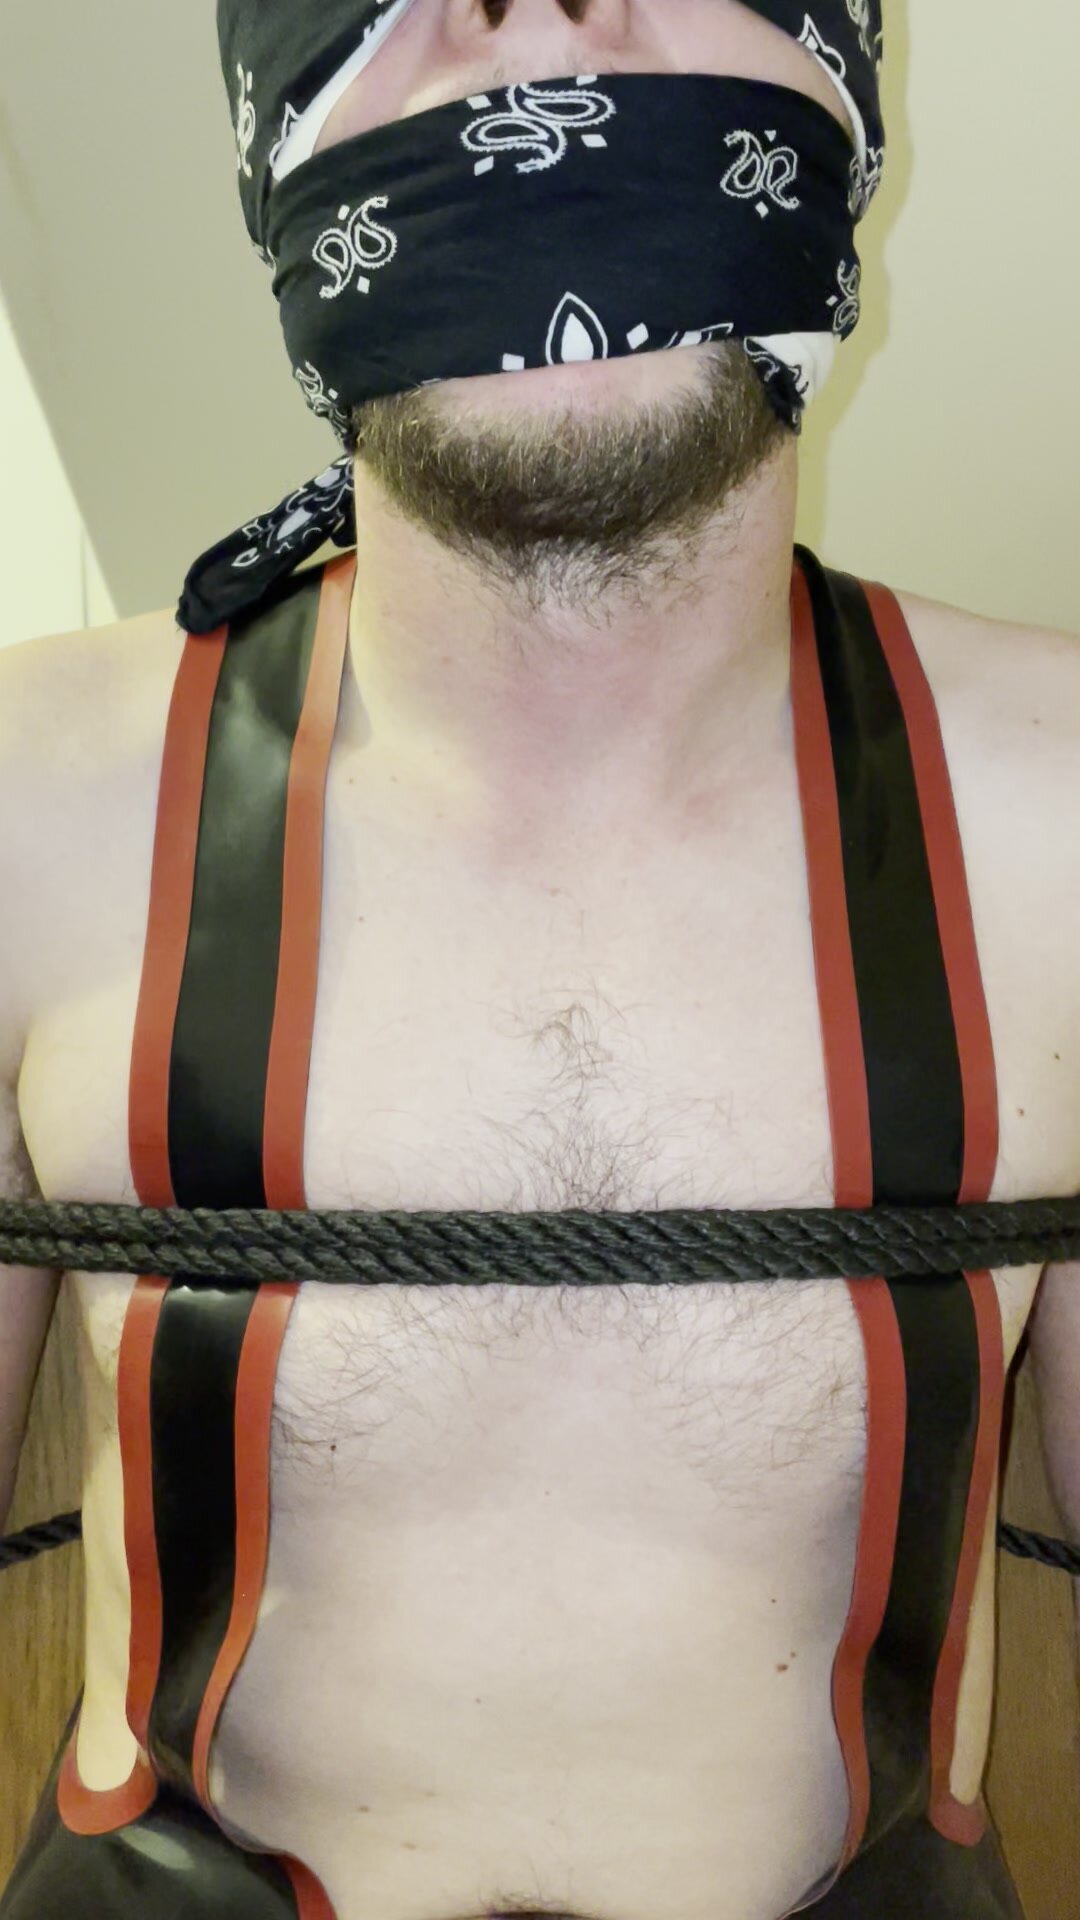 Bound and edged!